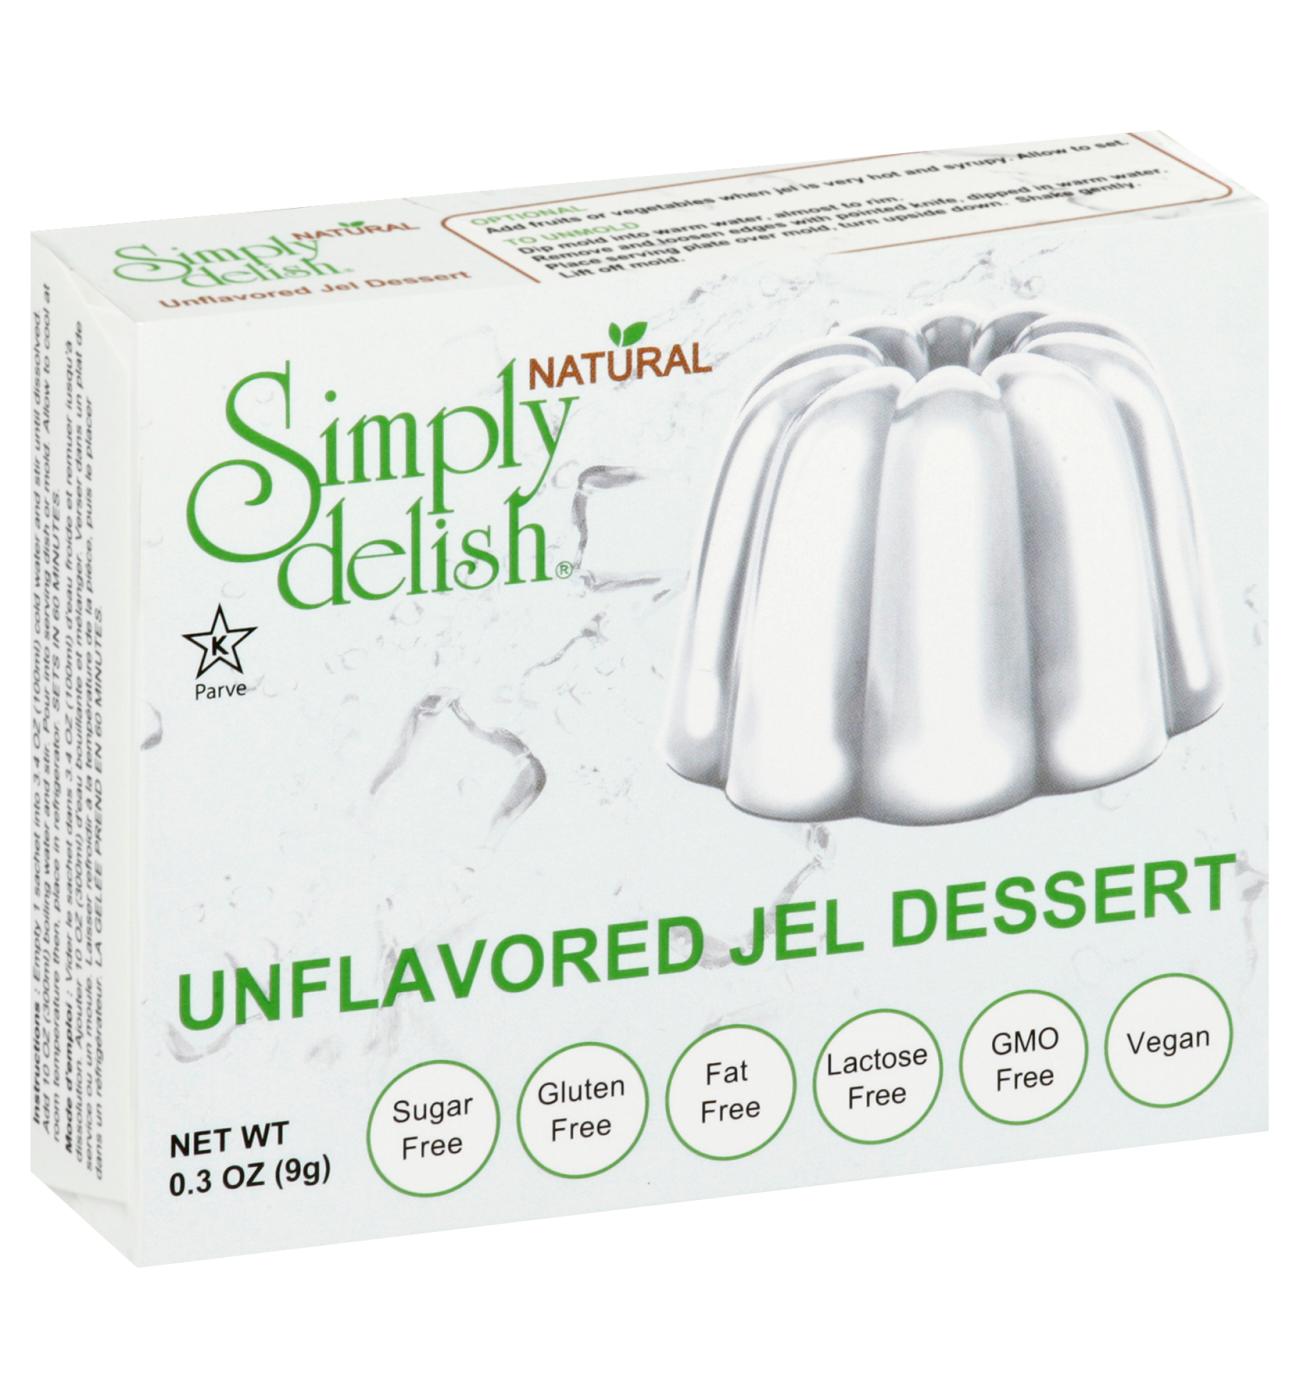 Simply Delish Unflavored Jel Dessert Shop Pudding And Gelatin Mix At H E B